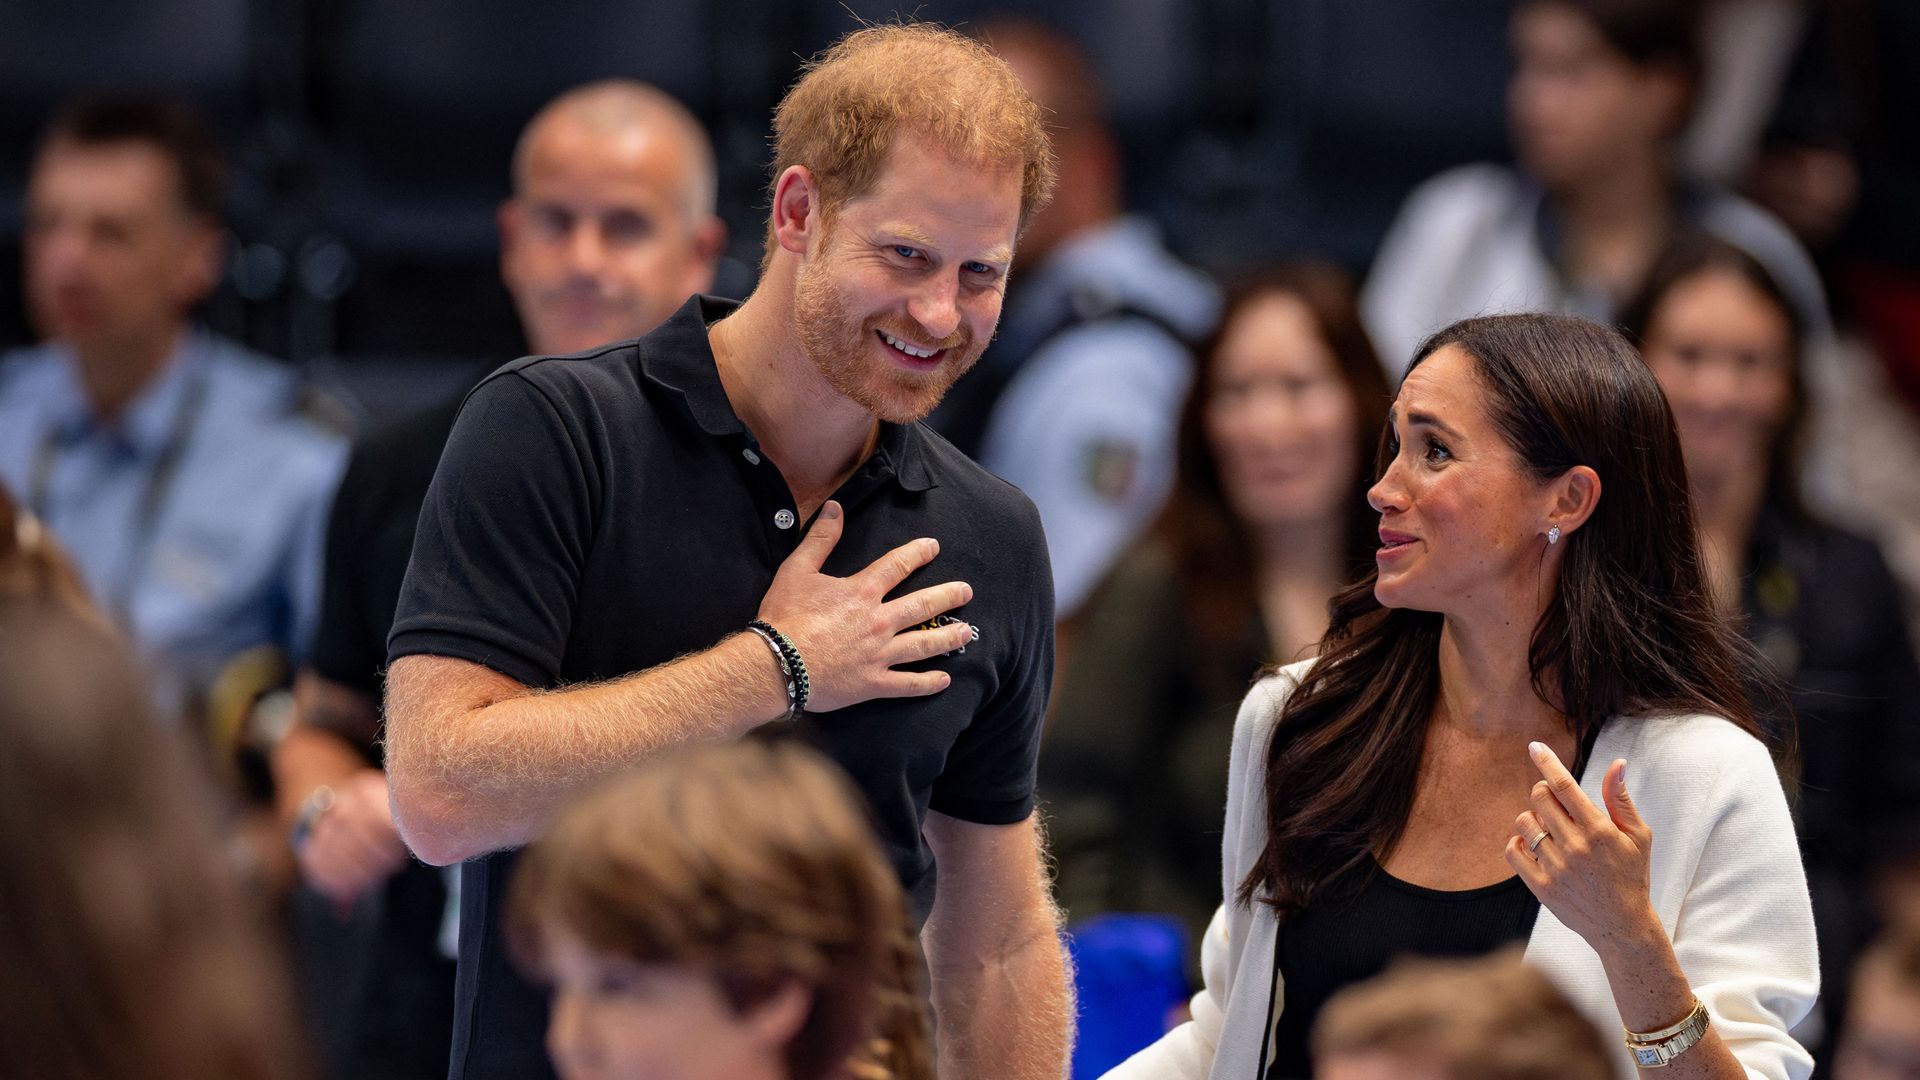 Meghan Markle's secret outing in Dusseldorf revealed following end of Invictus Games